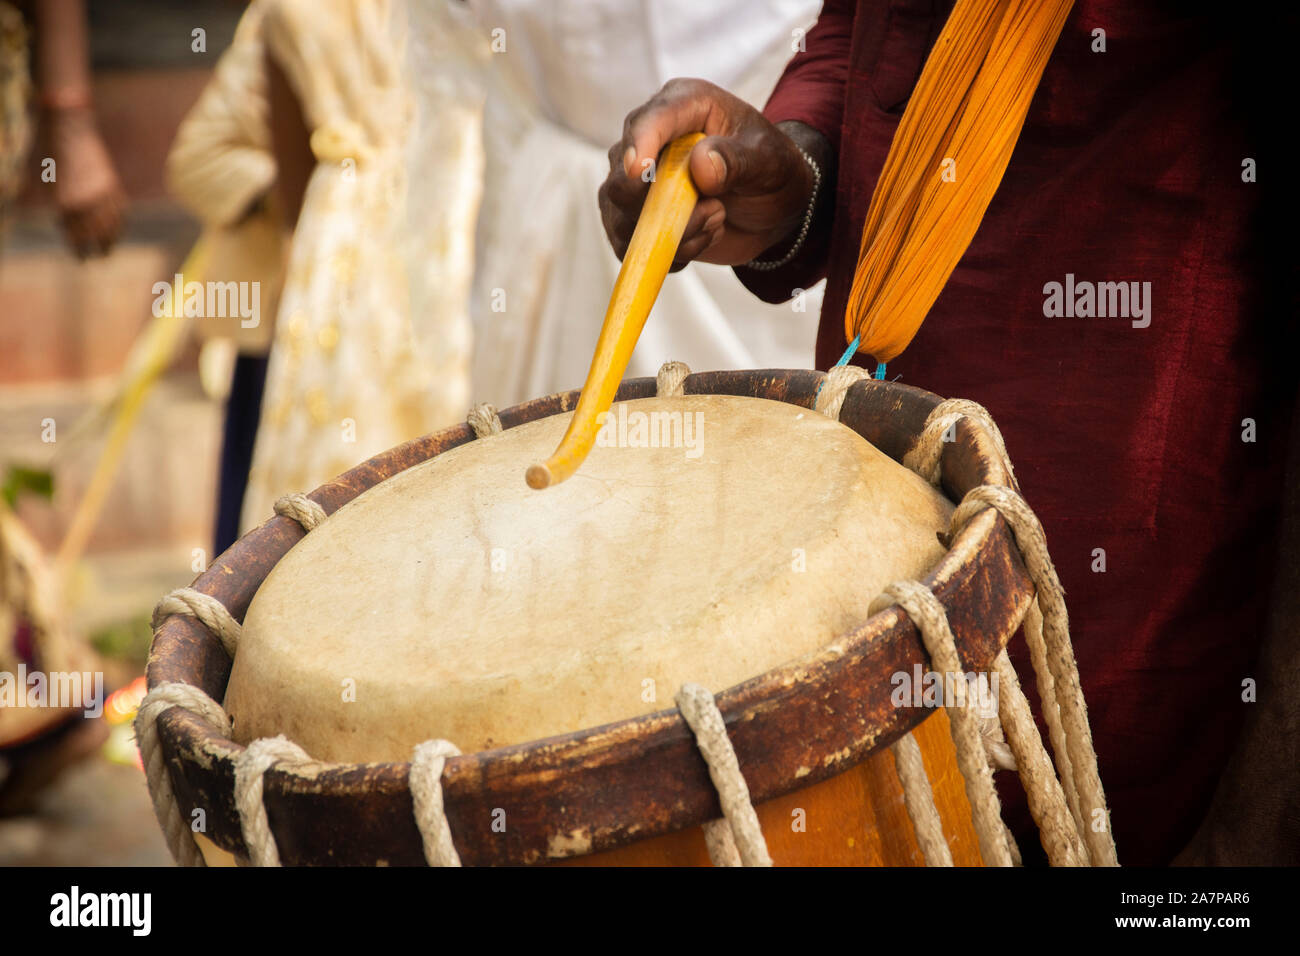 Close up of Hands performing Indian art form Chanda or chande cylindrical percussion drums playing during ceremony Stock Photo